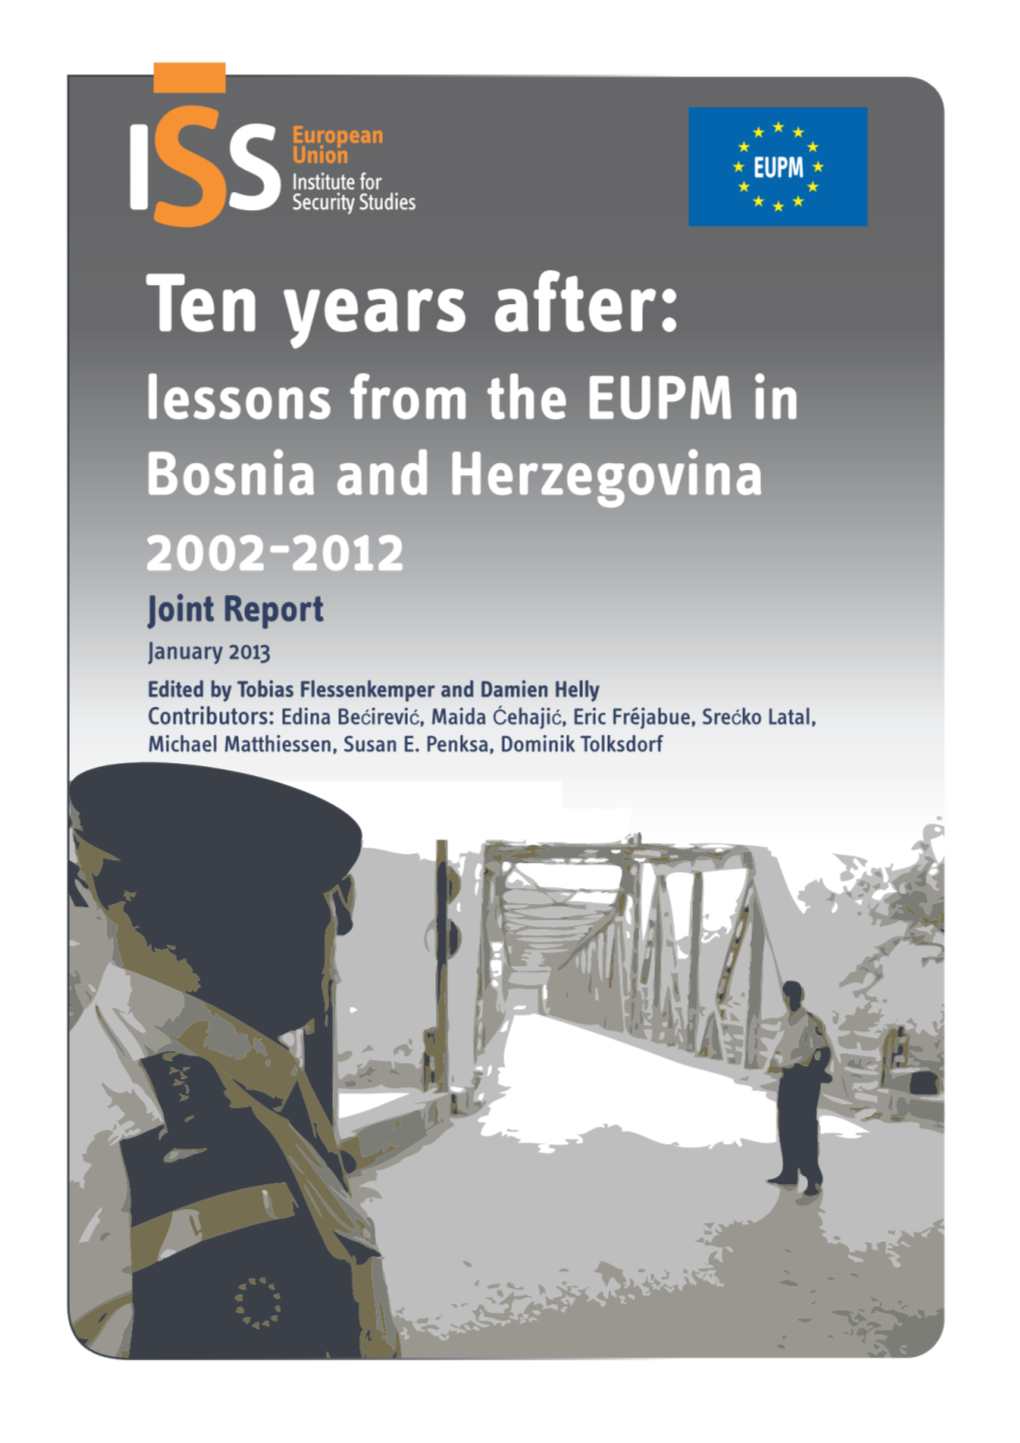 Lessons from the EUPM in Bosnia and Herzegovina